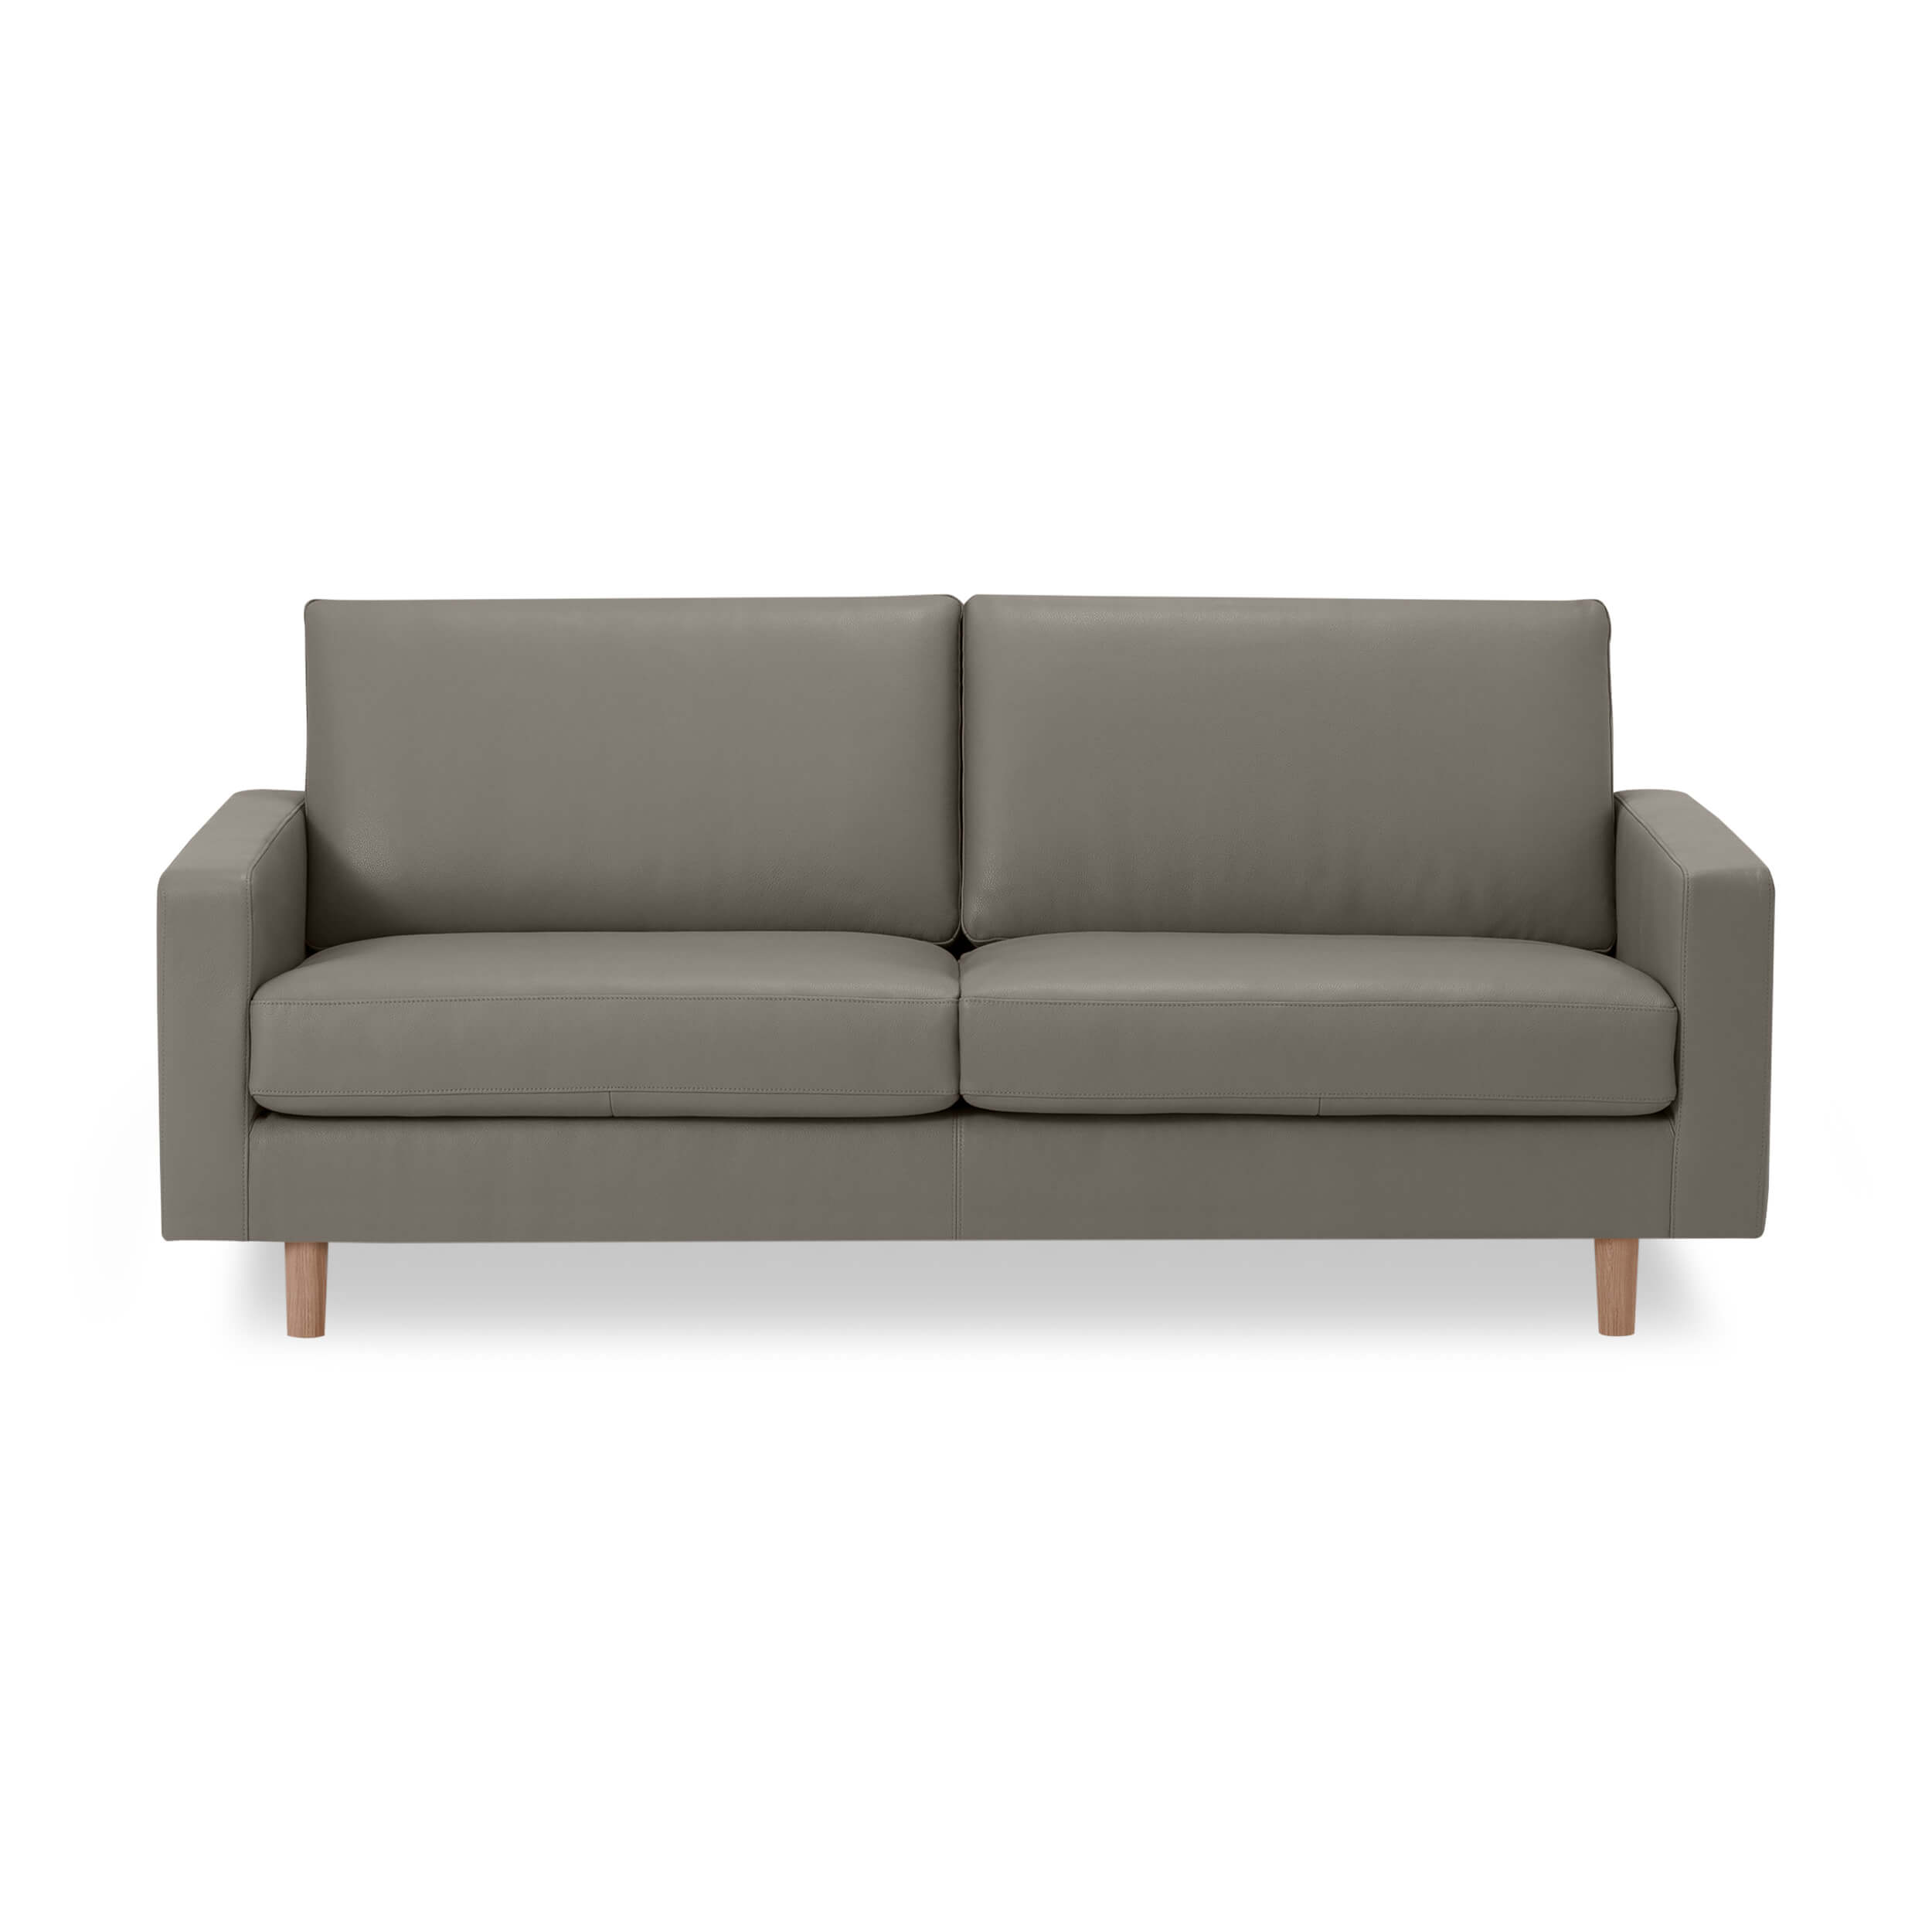 Apartment Size Sofas Small Fabric And, Apartment Size Leather Sofas